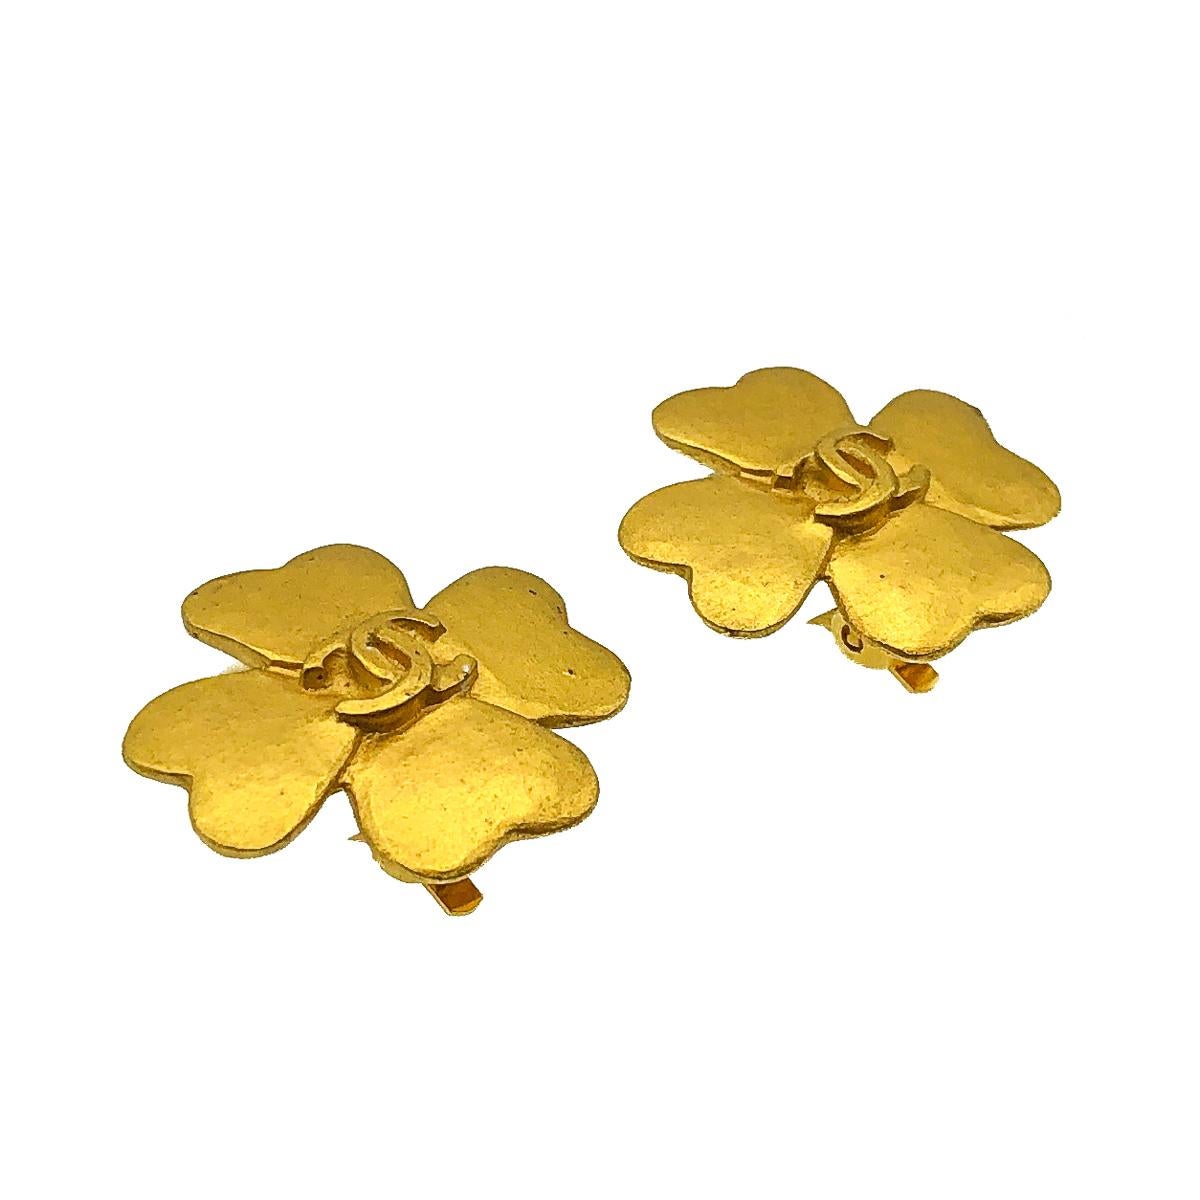 A timeless pair of Vintage Chanel Lucky Clover Earrings from 1995 and featuring the iconic interlocking CC. A true golden age for the House with Lagerfeld and Castellane at the helm.

Vintage Condition: Very good without damage or noteworthy